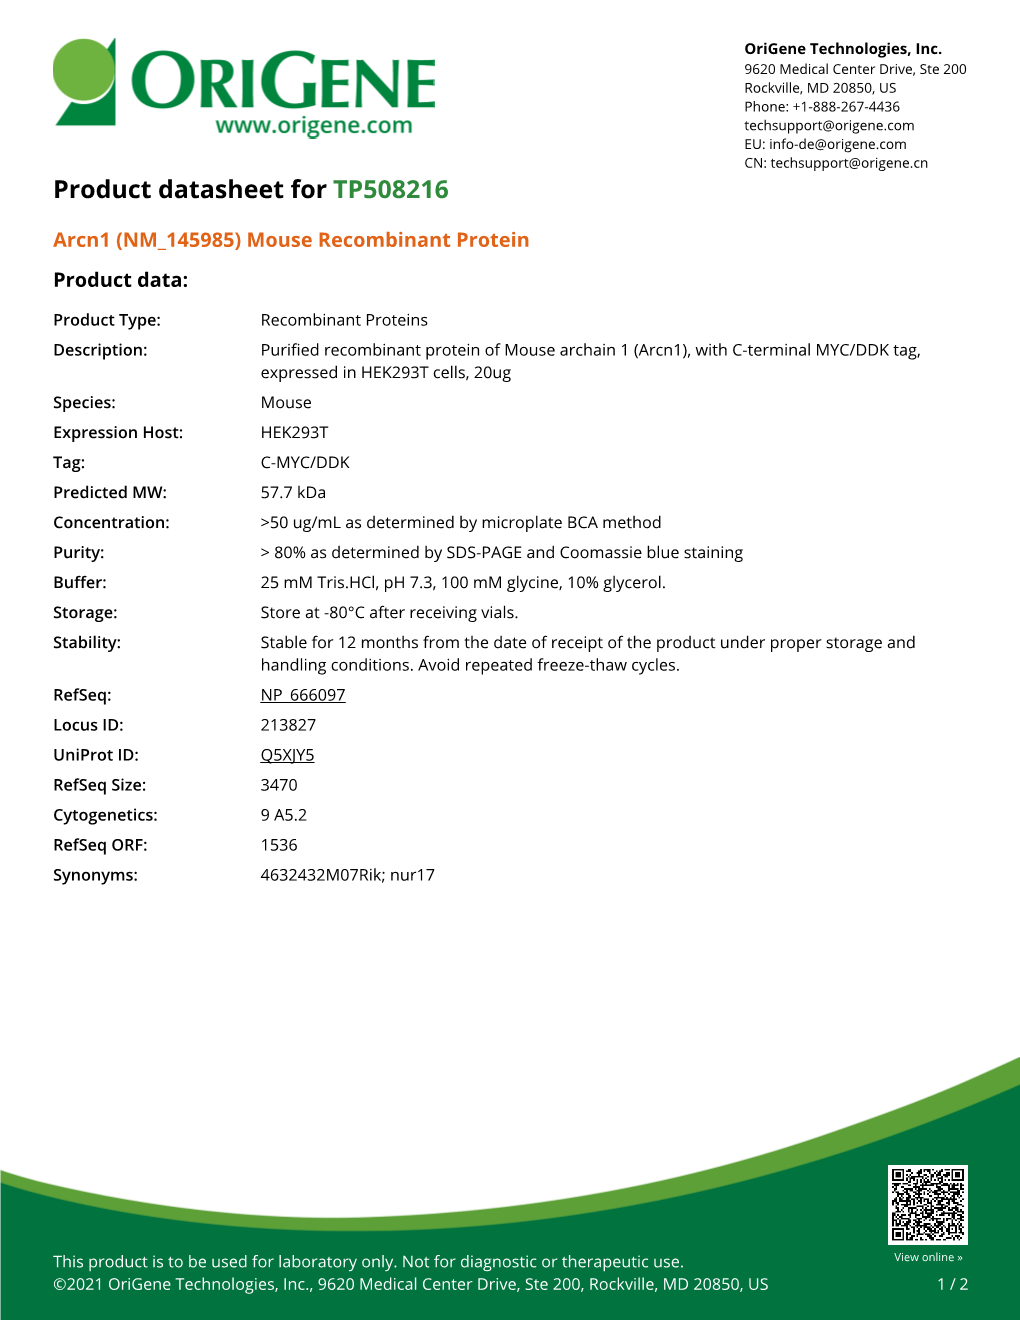 Arcn1 (NM 145985) Mouse Recombinant Protein Product Data